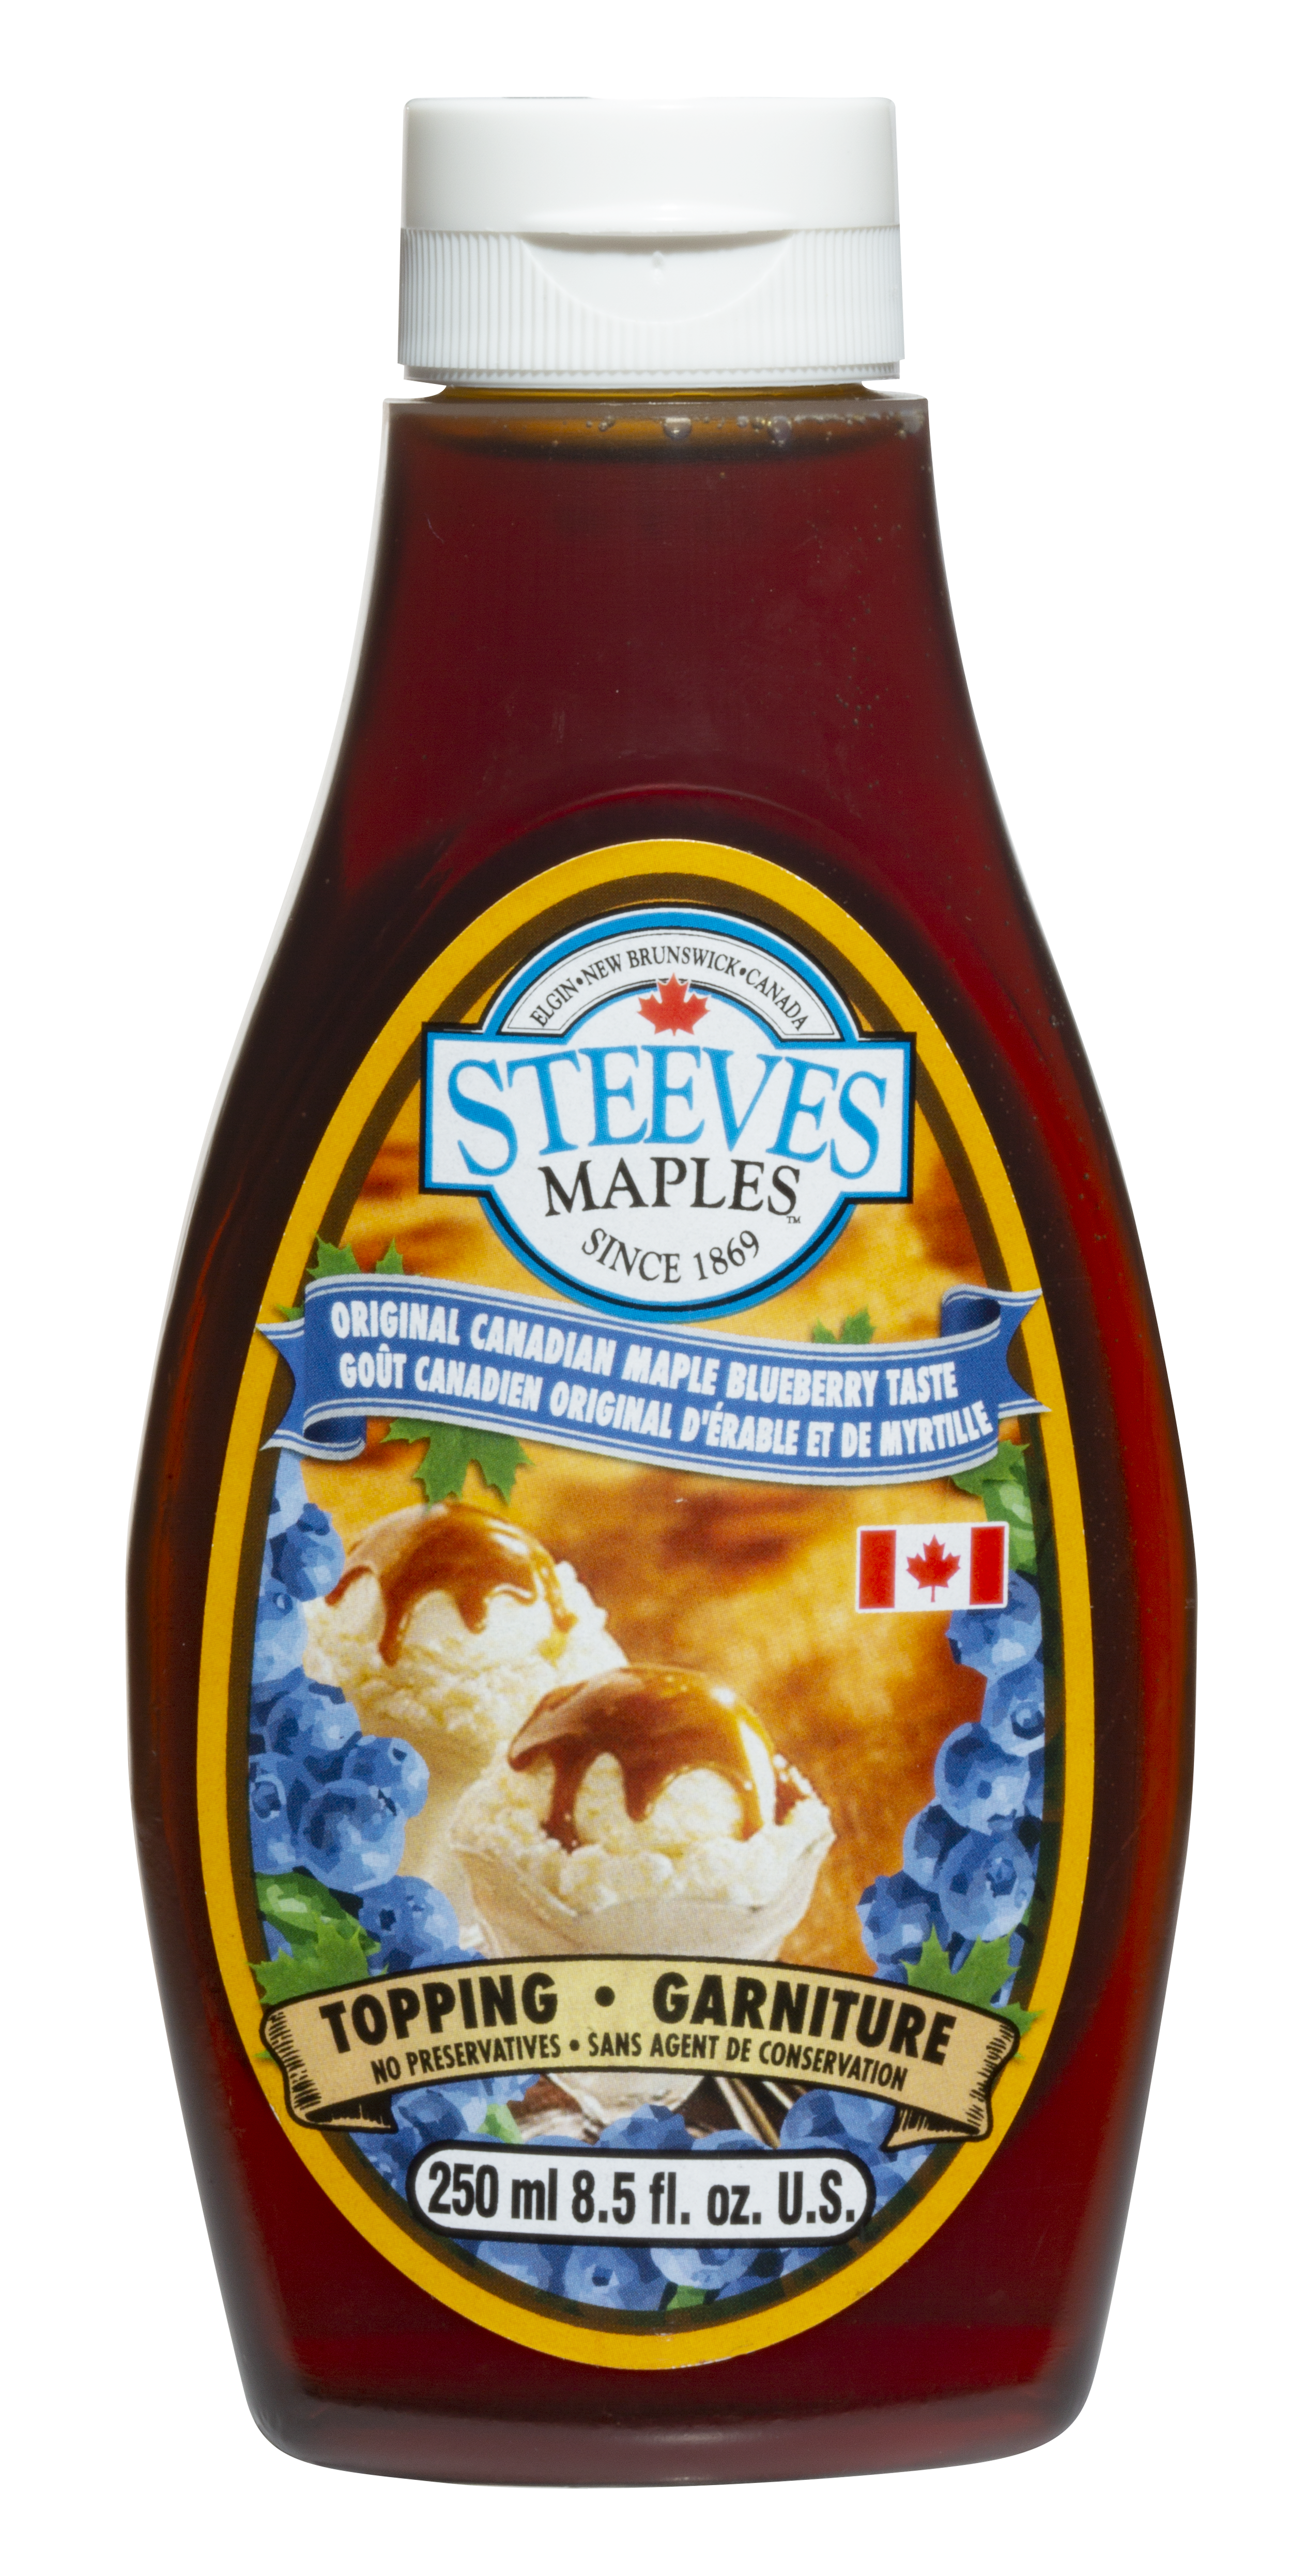 Steeves Maples Sirop Sans Sucre - 250 ml